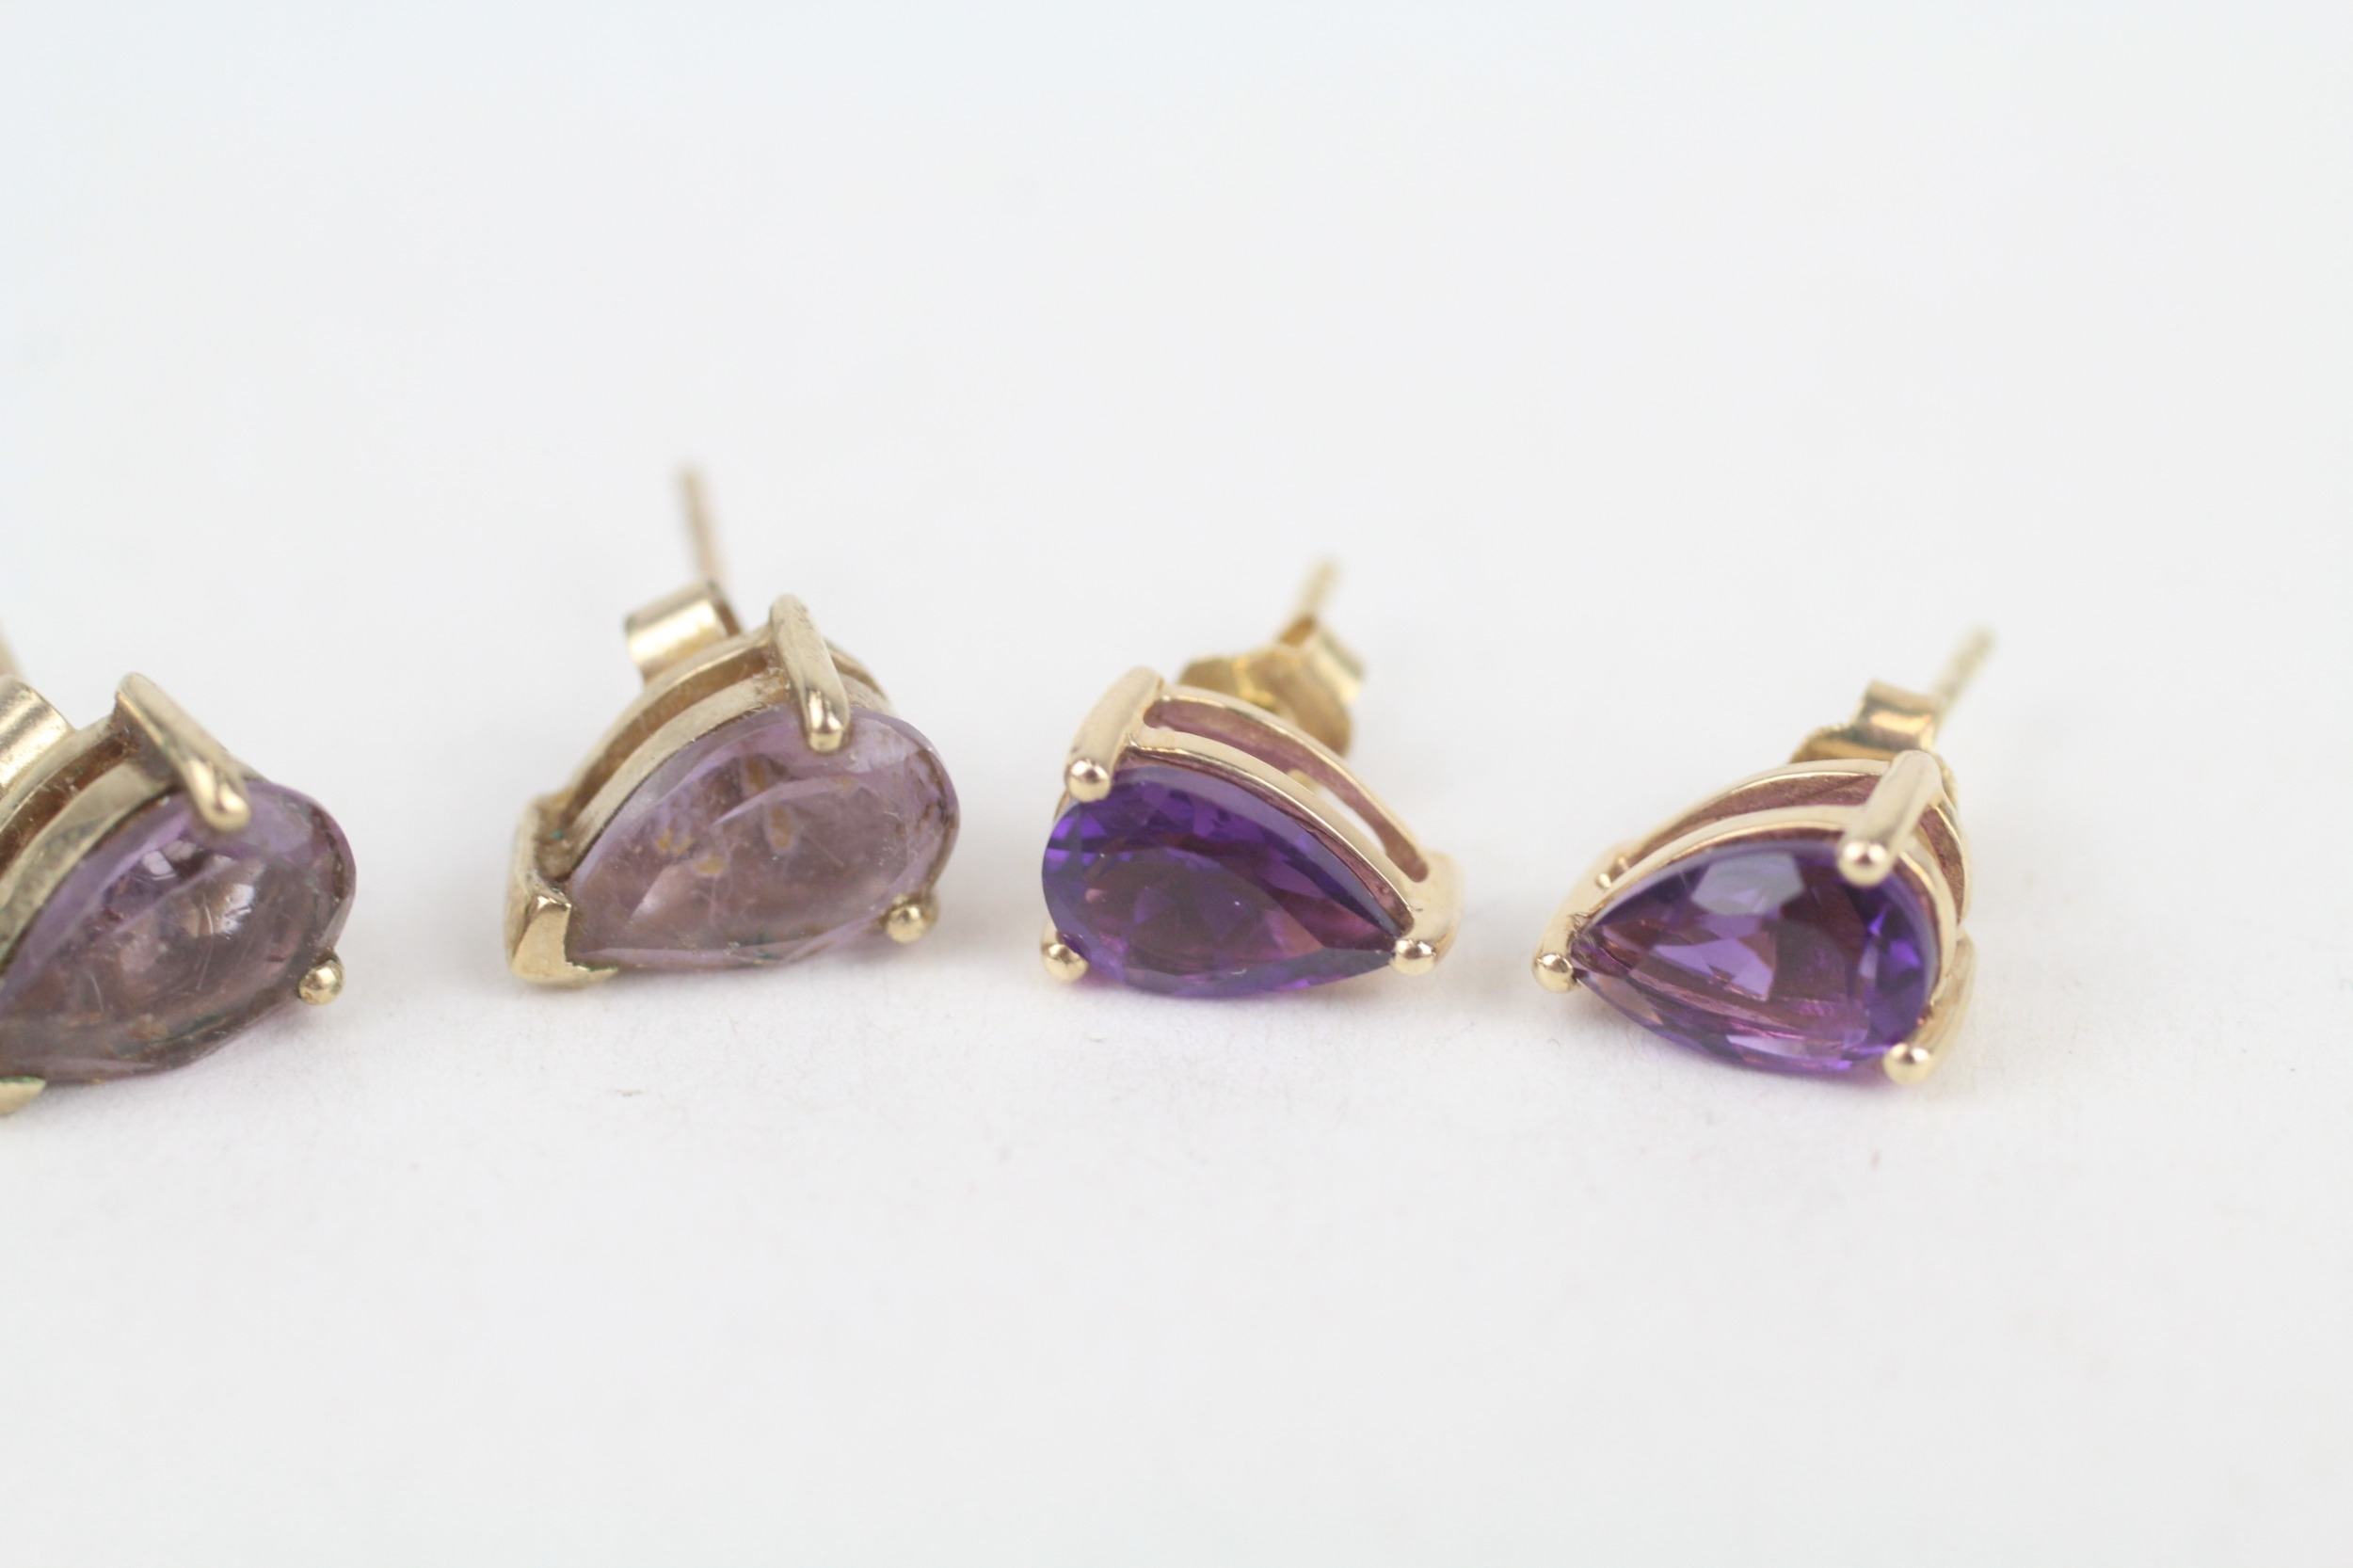 2x 9ct gold pear cut amethyst stud earrings with scroll backs - Image 3 of 4